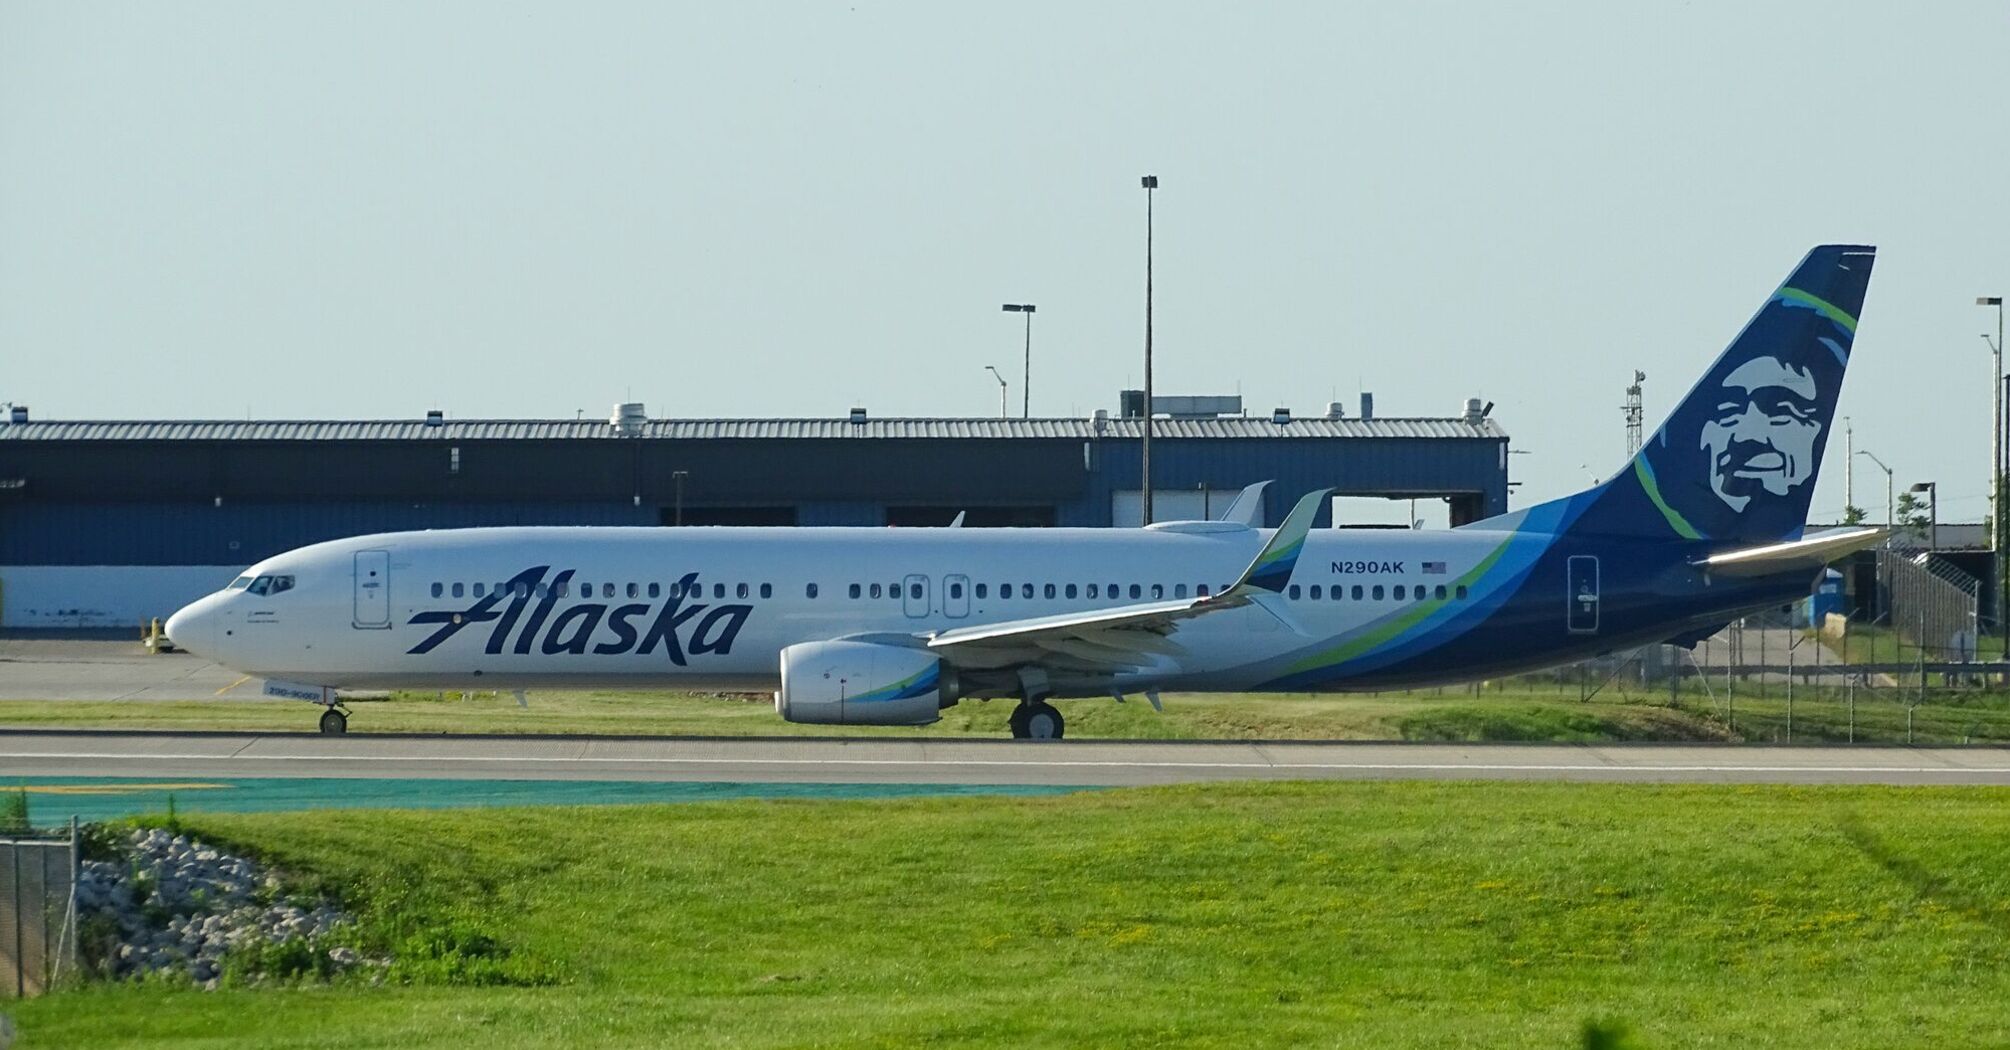 Alaska Airlines plane on the taxiway with the company’s distinctive blue and green livery